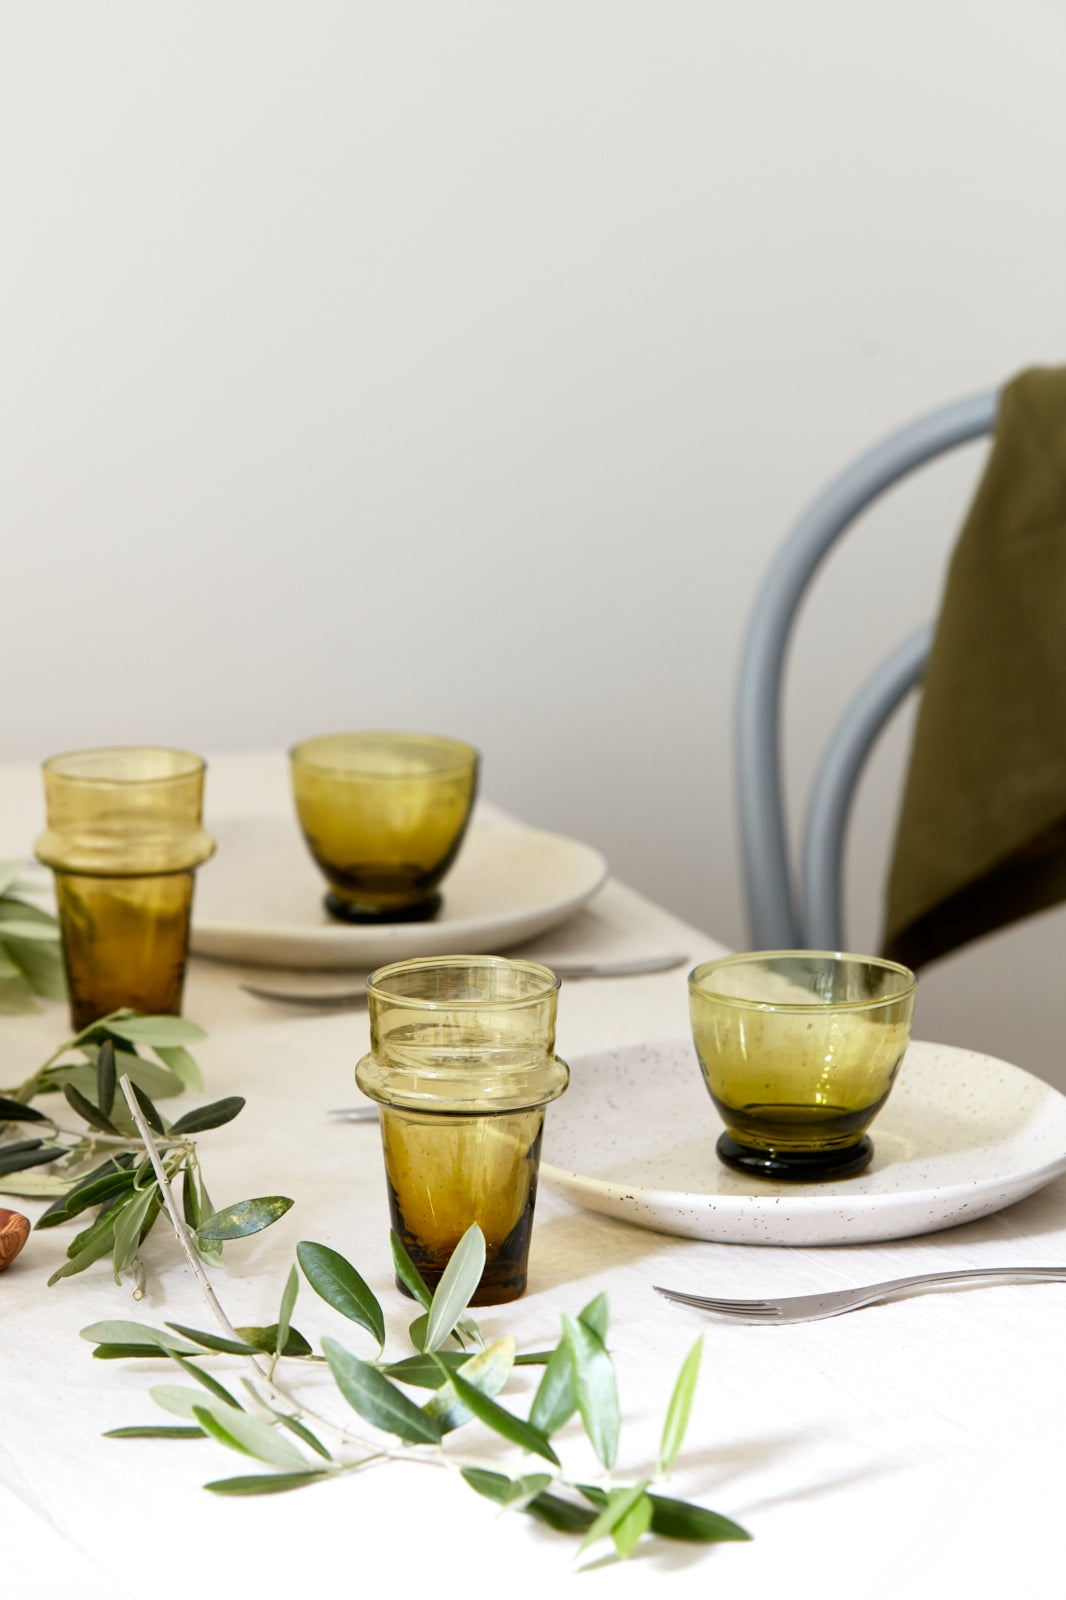 Simple and elegant, the modern glass cup is perfect to serve your favorite drinks or a little desert or even condiments. Handblown in morocco using local recycled beer bottles, giving these materials another life. These glasses are ideal for entertainment or everyday drink ware.